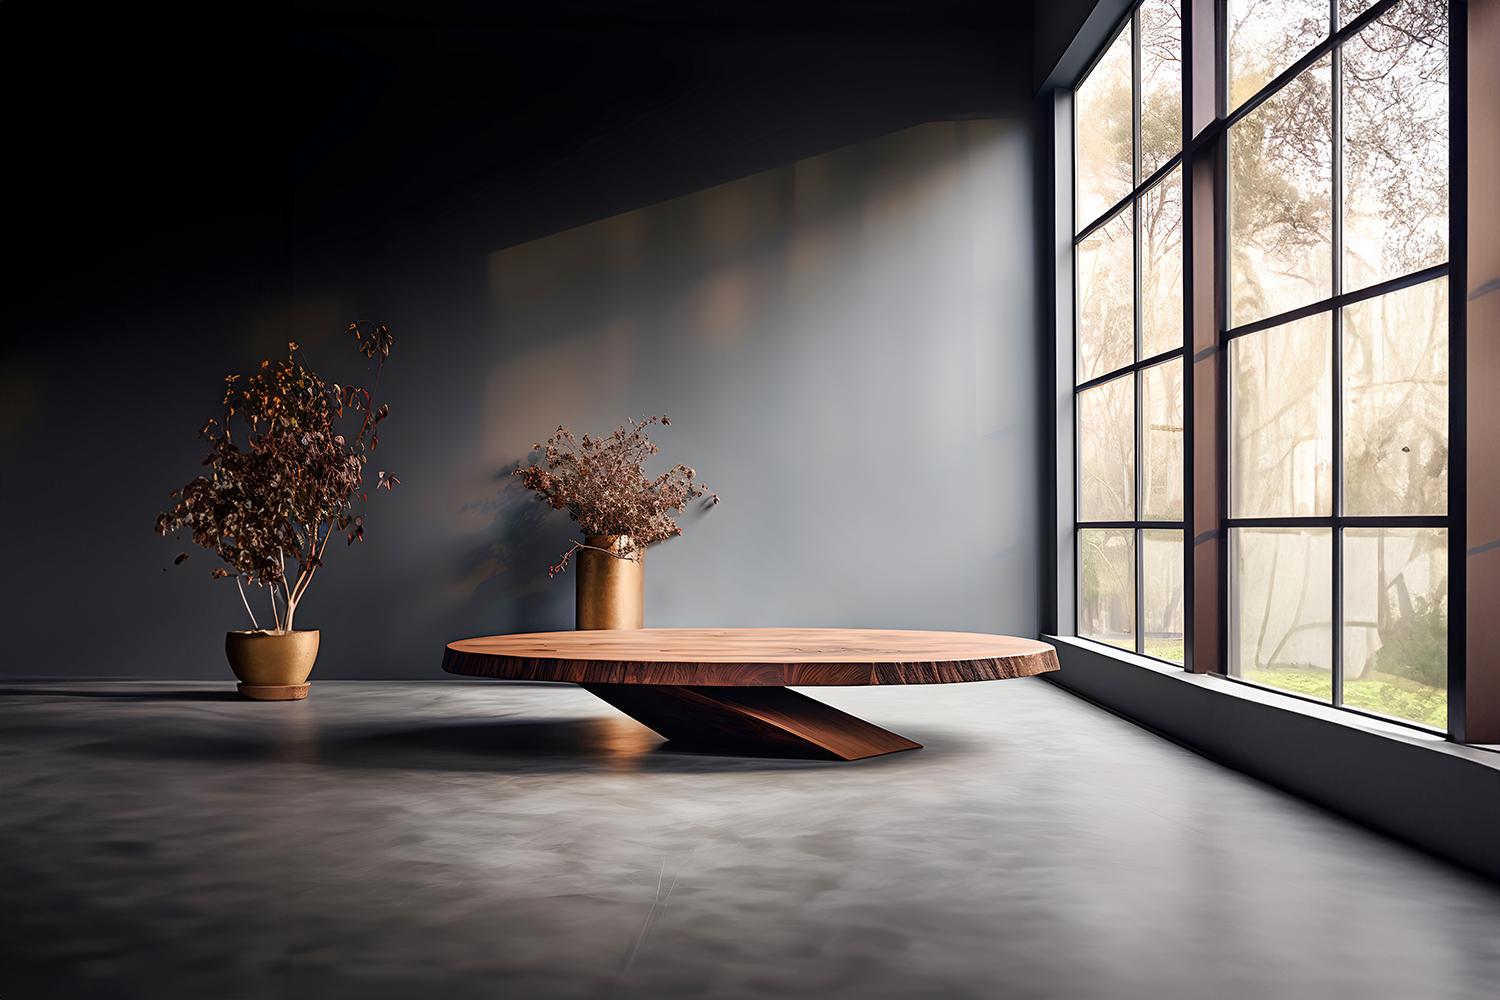 Round Coffee Table Made of Solid Wood, Center Table Solace S22 by Joel Escalona


The Solace table series, designed by Joel Escalona, is a furniture collection that exudes balance and presence, thanks to its sensuous, dense, and irregular shapes.